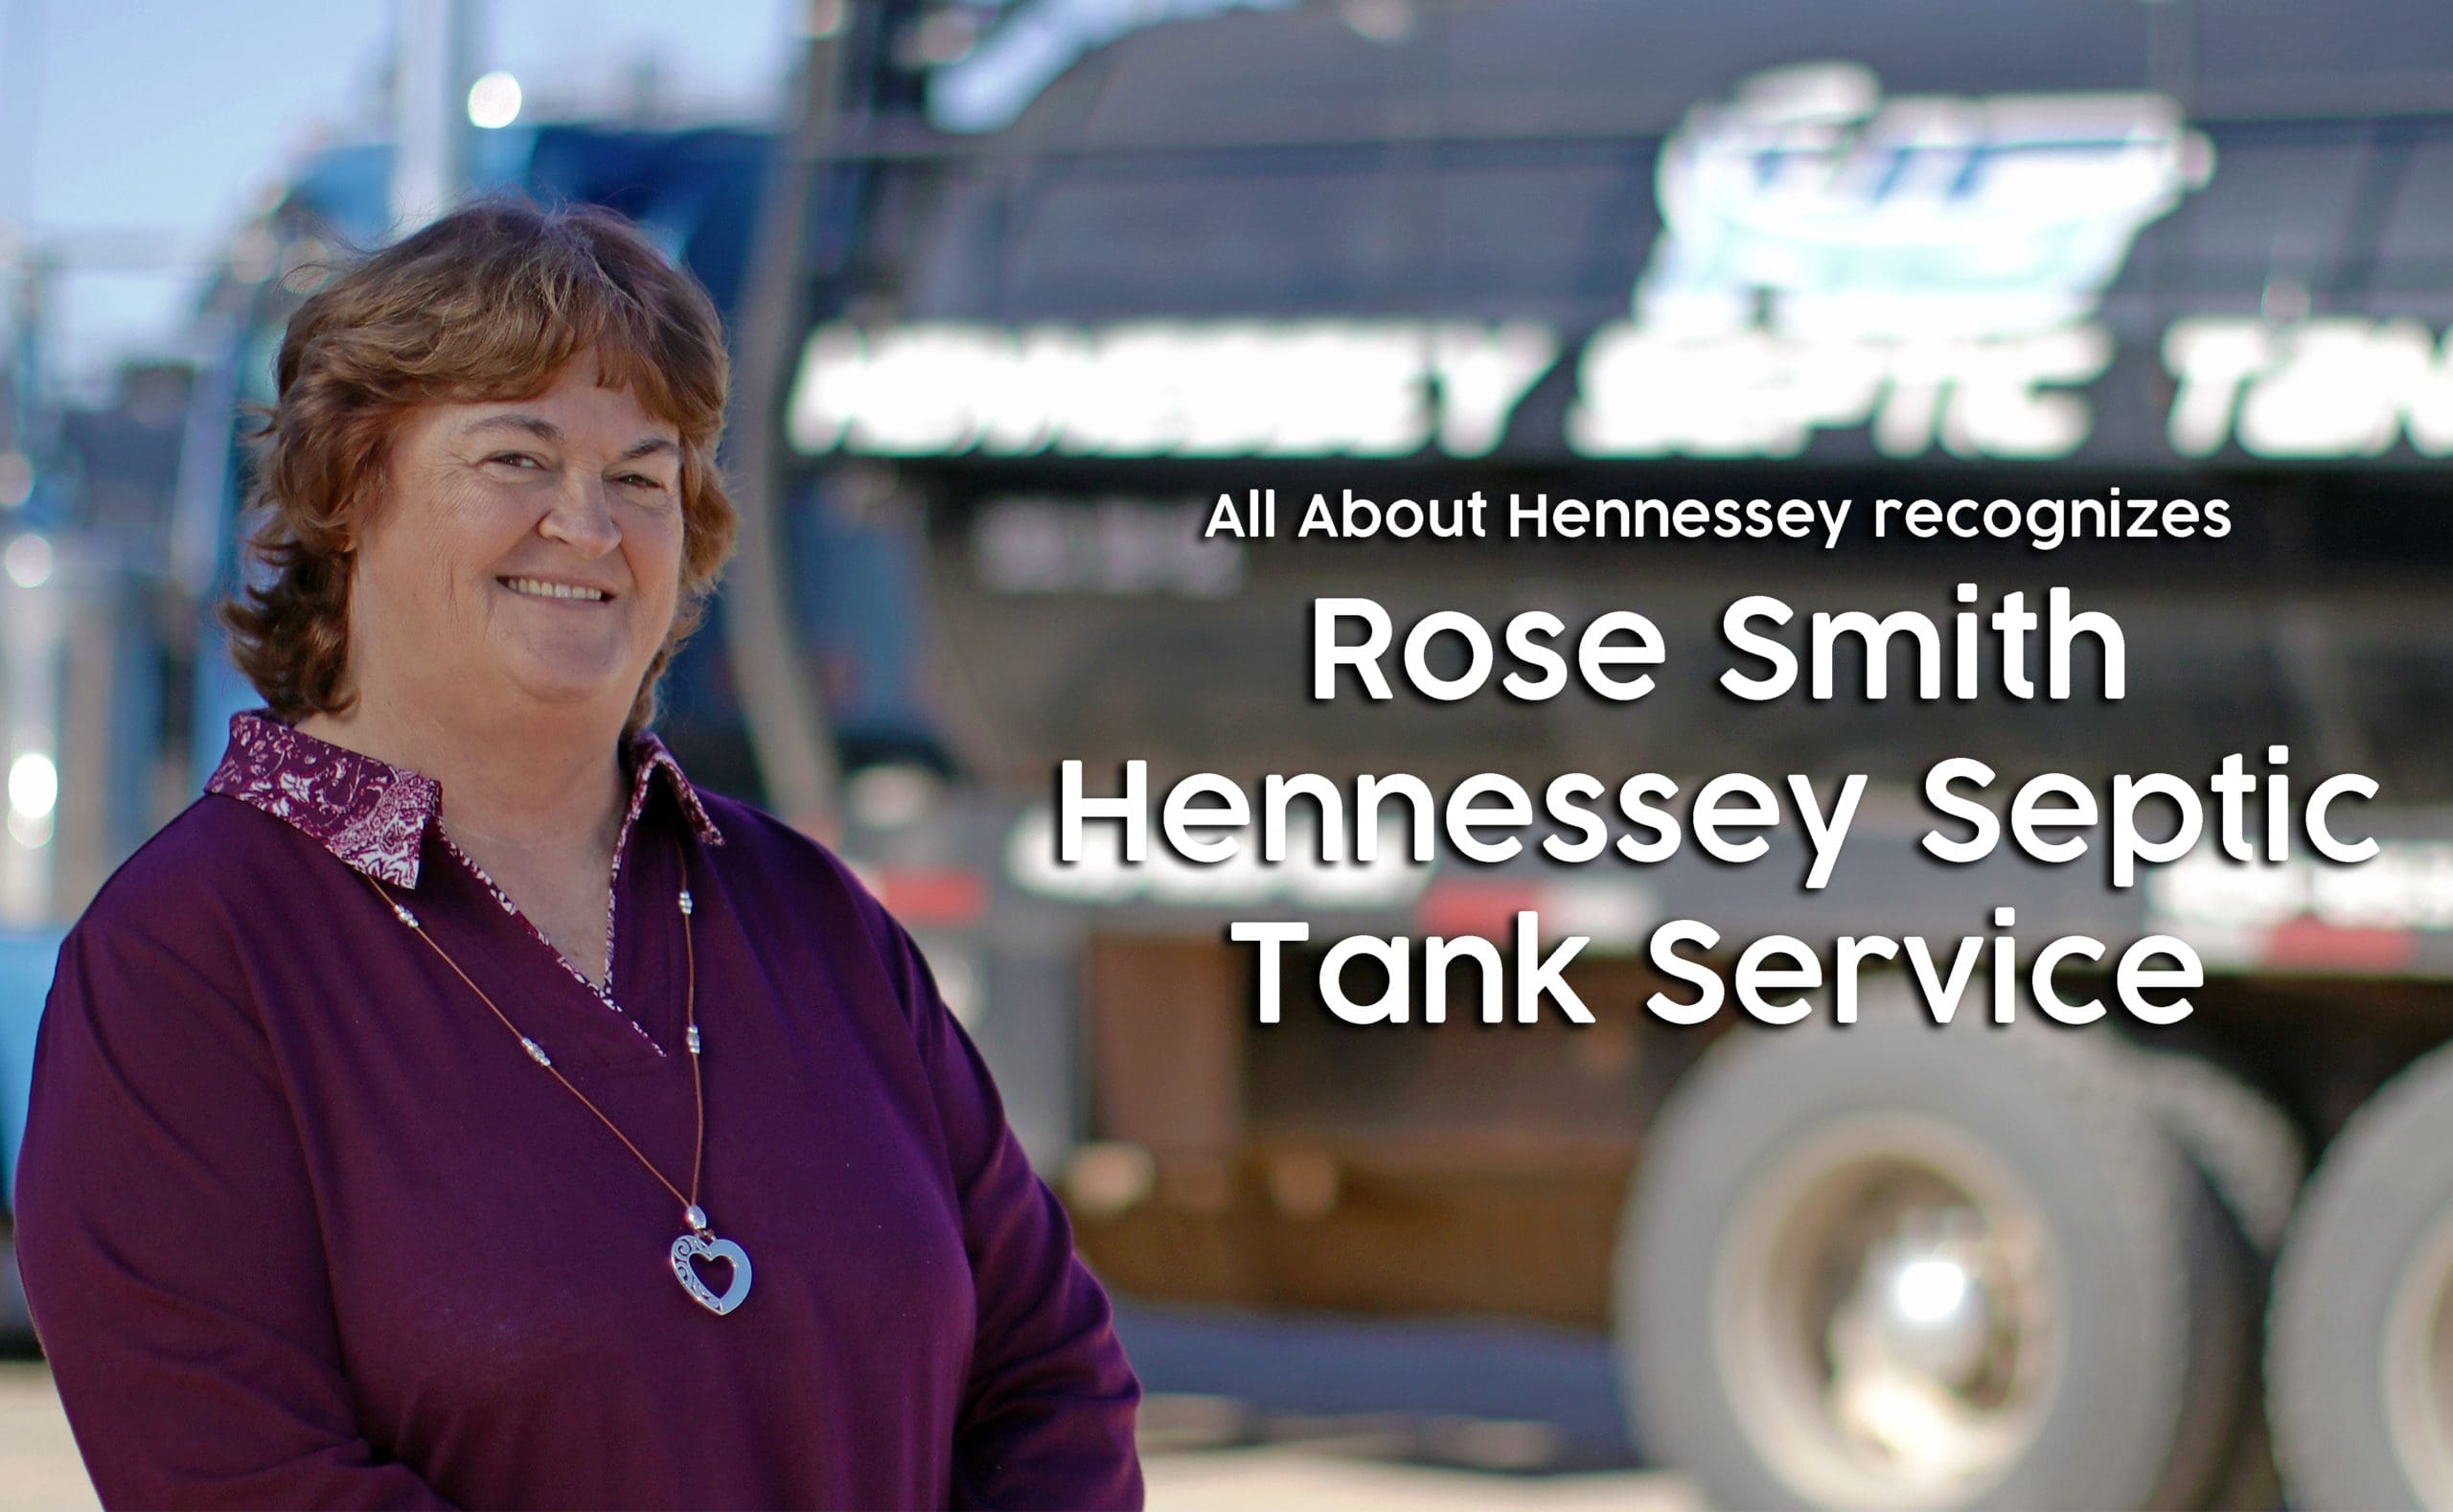 ROSE SMITH – HENNESSEY SEPTIC TANK SERVICE AS OUR WOMAN IN BUSINESS.